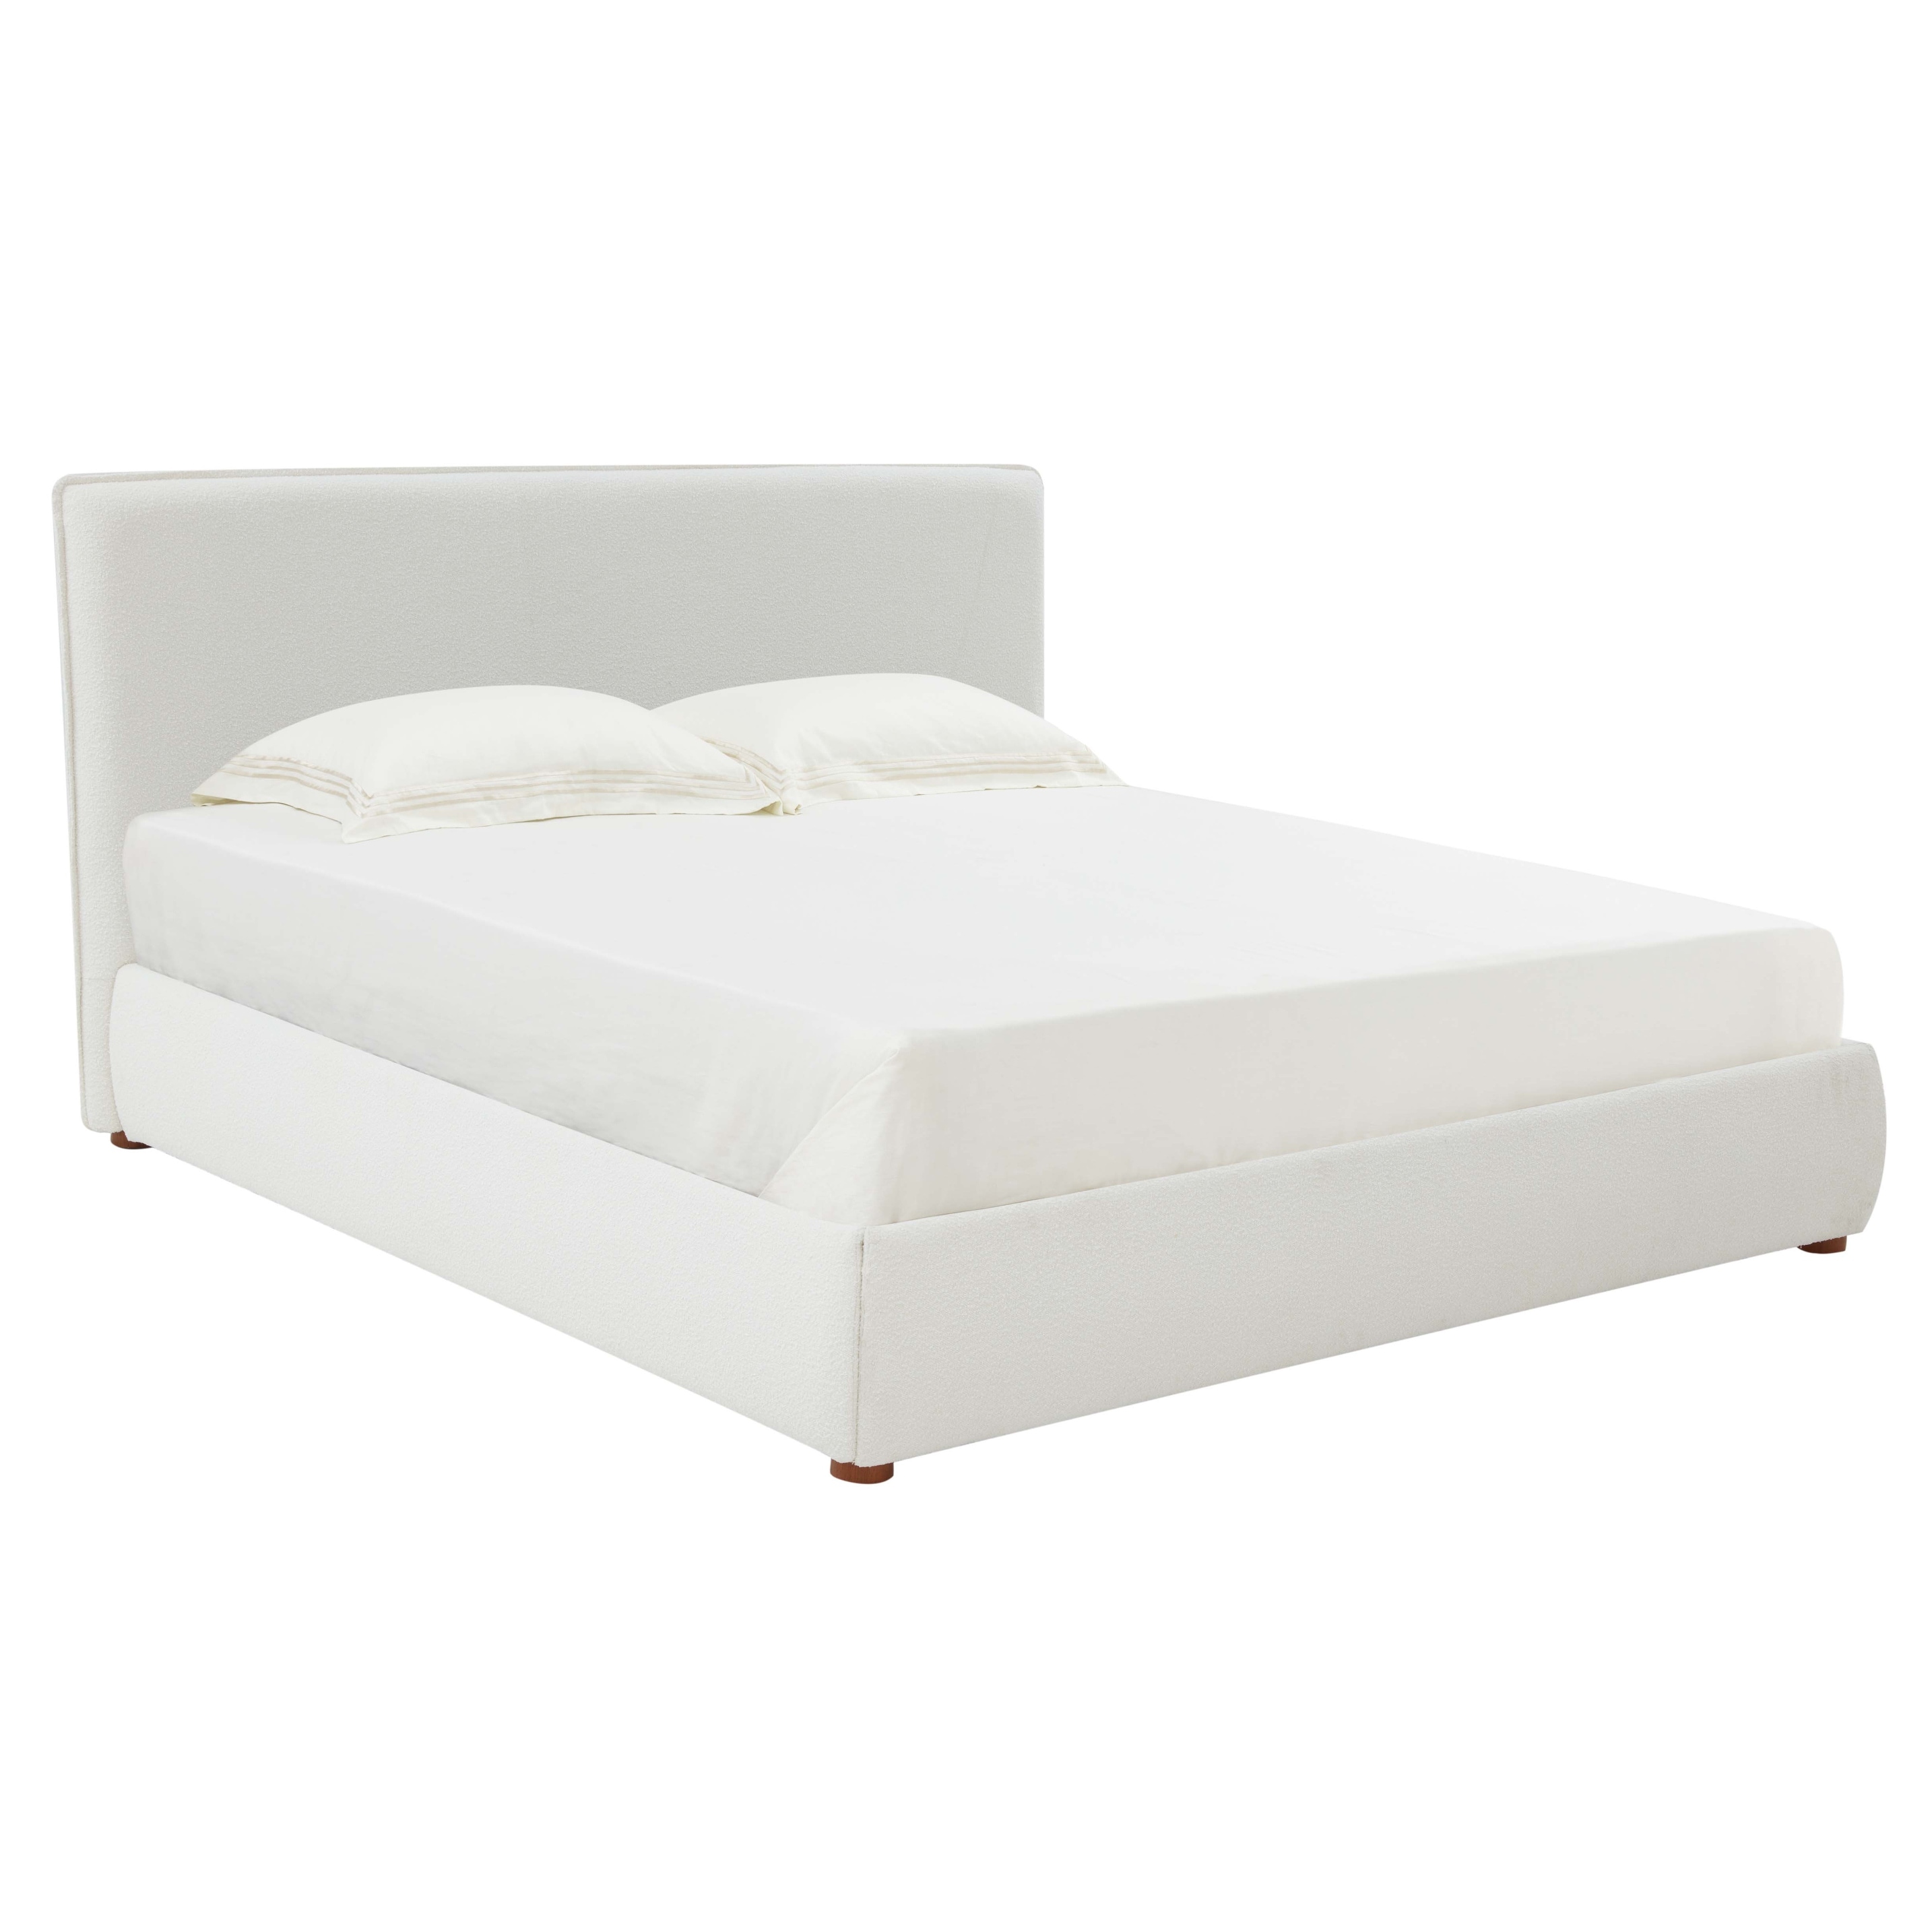 SAFAVIEH Couture Mcallister Cane Bed - On Sale - Bed Bath & Beyond -  37773185